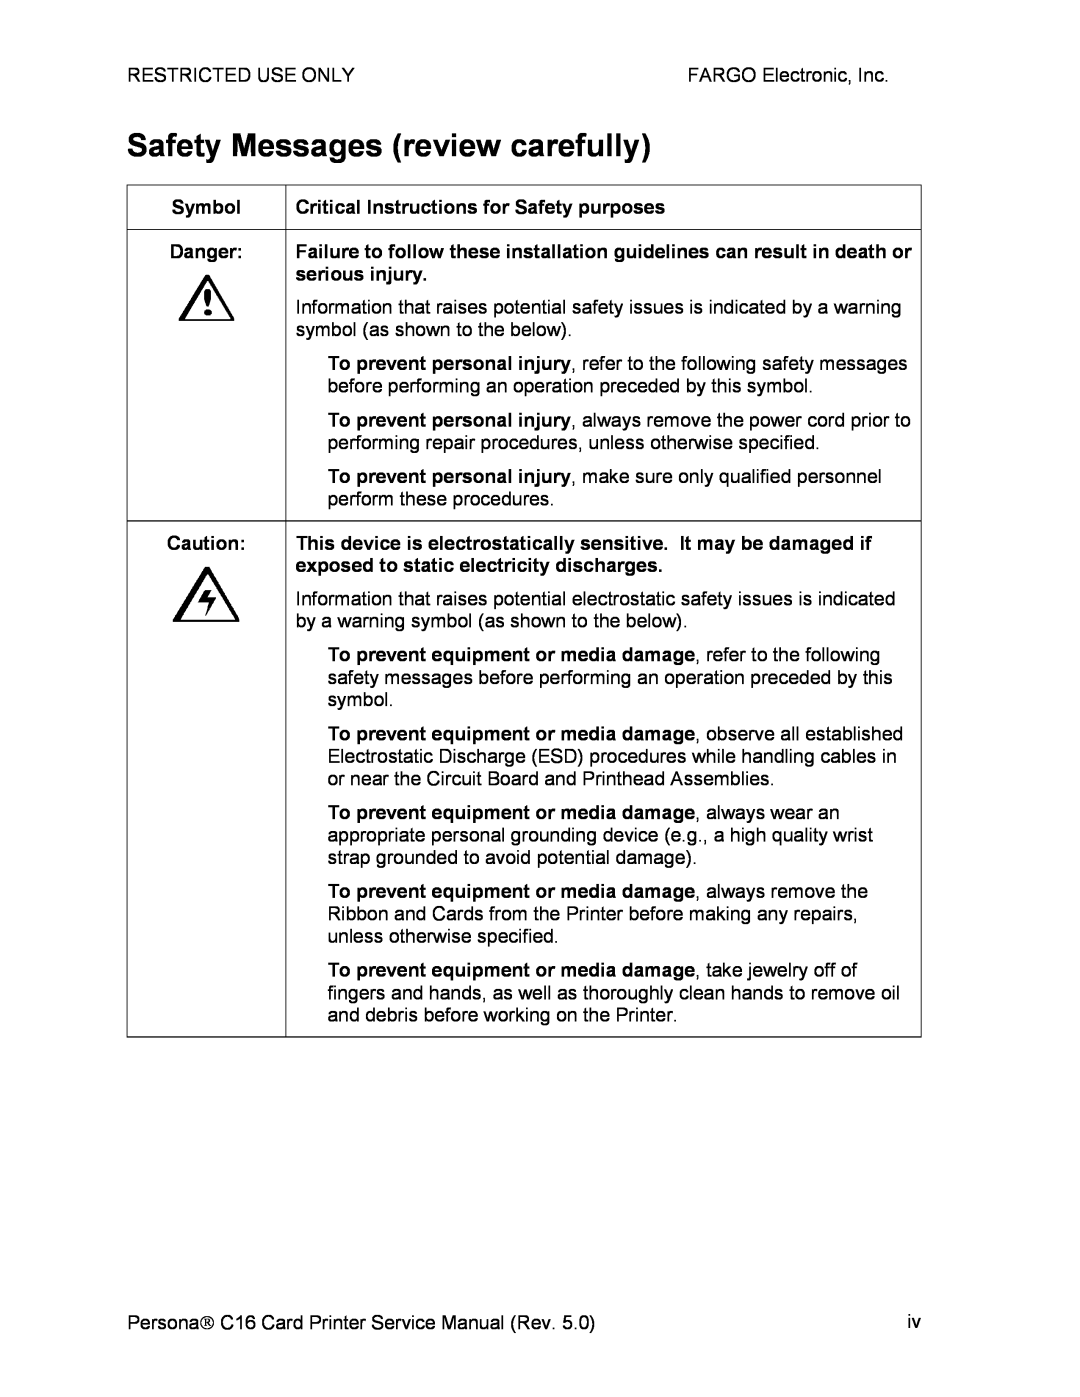 FARGO electronic C16 service manual Safety Messages review carefully 